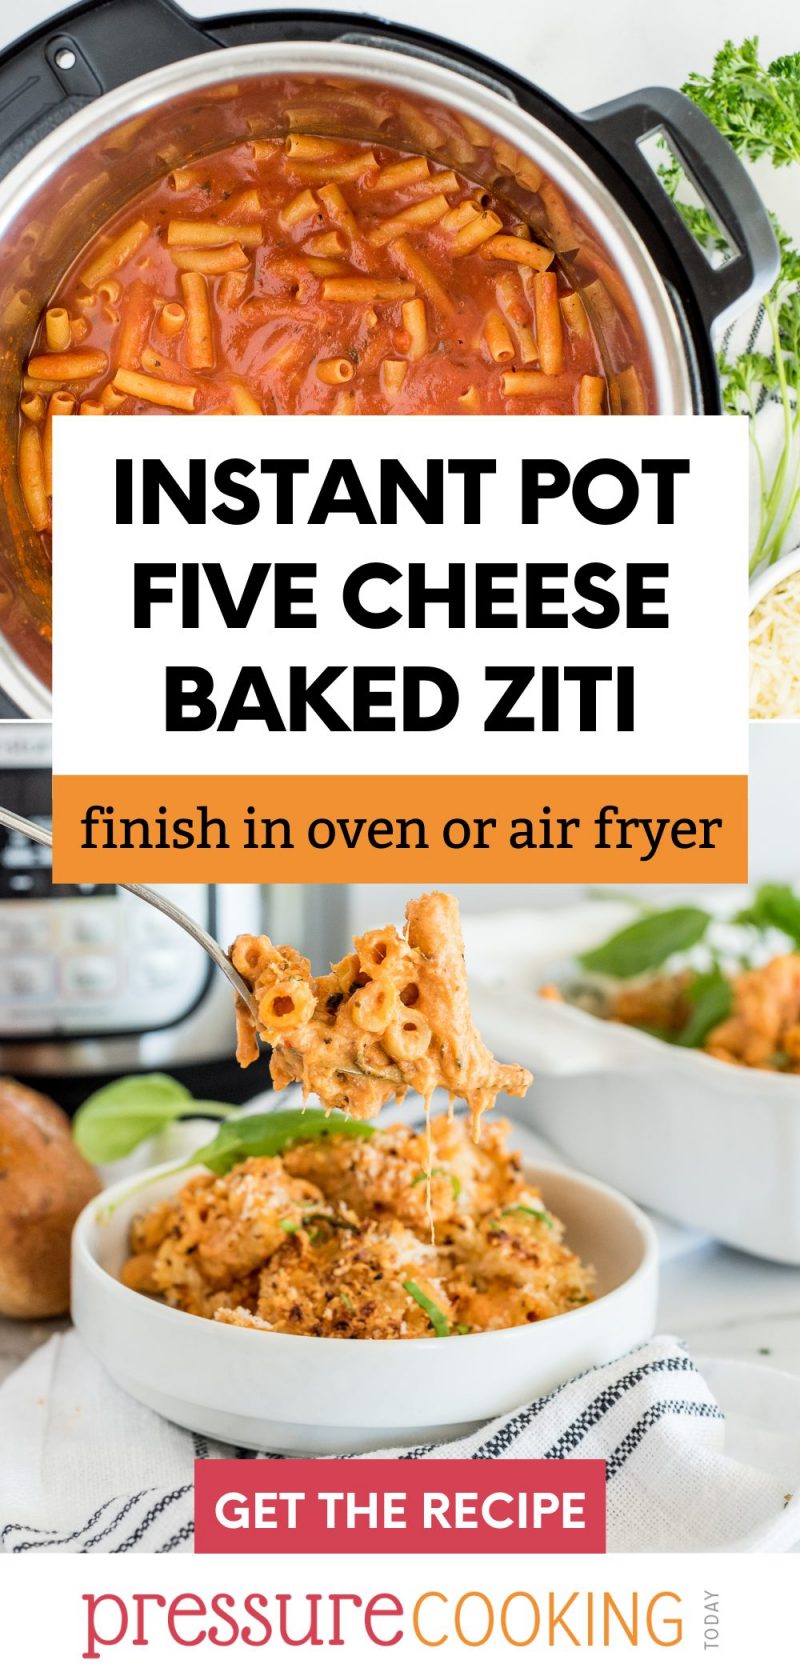 A two-image pinterest pin promoting Instant Pot five cheese baked ziti. The top image shows the pasta in the Instant Pot before cooking, the  bottom image shows a spoonful of the ziti in front of an Instant Pot.